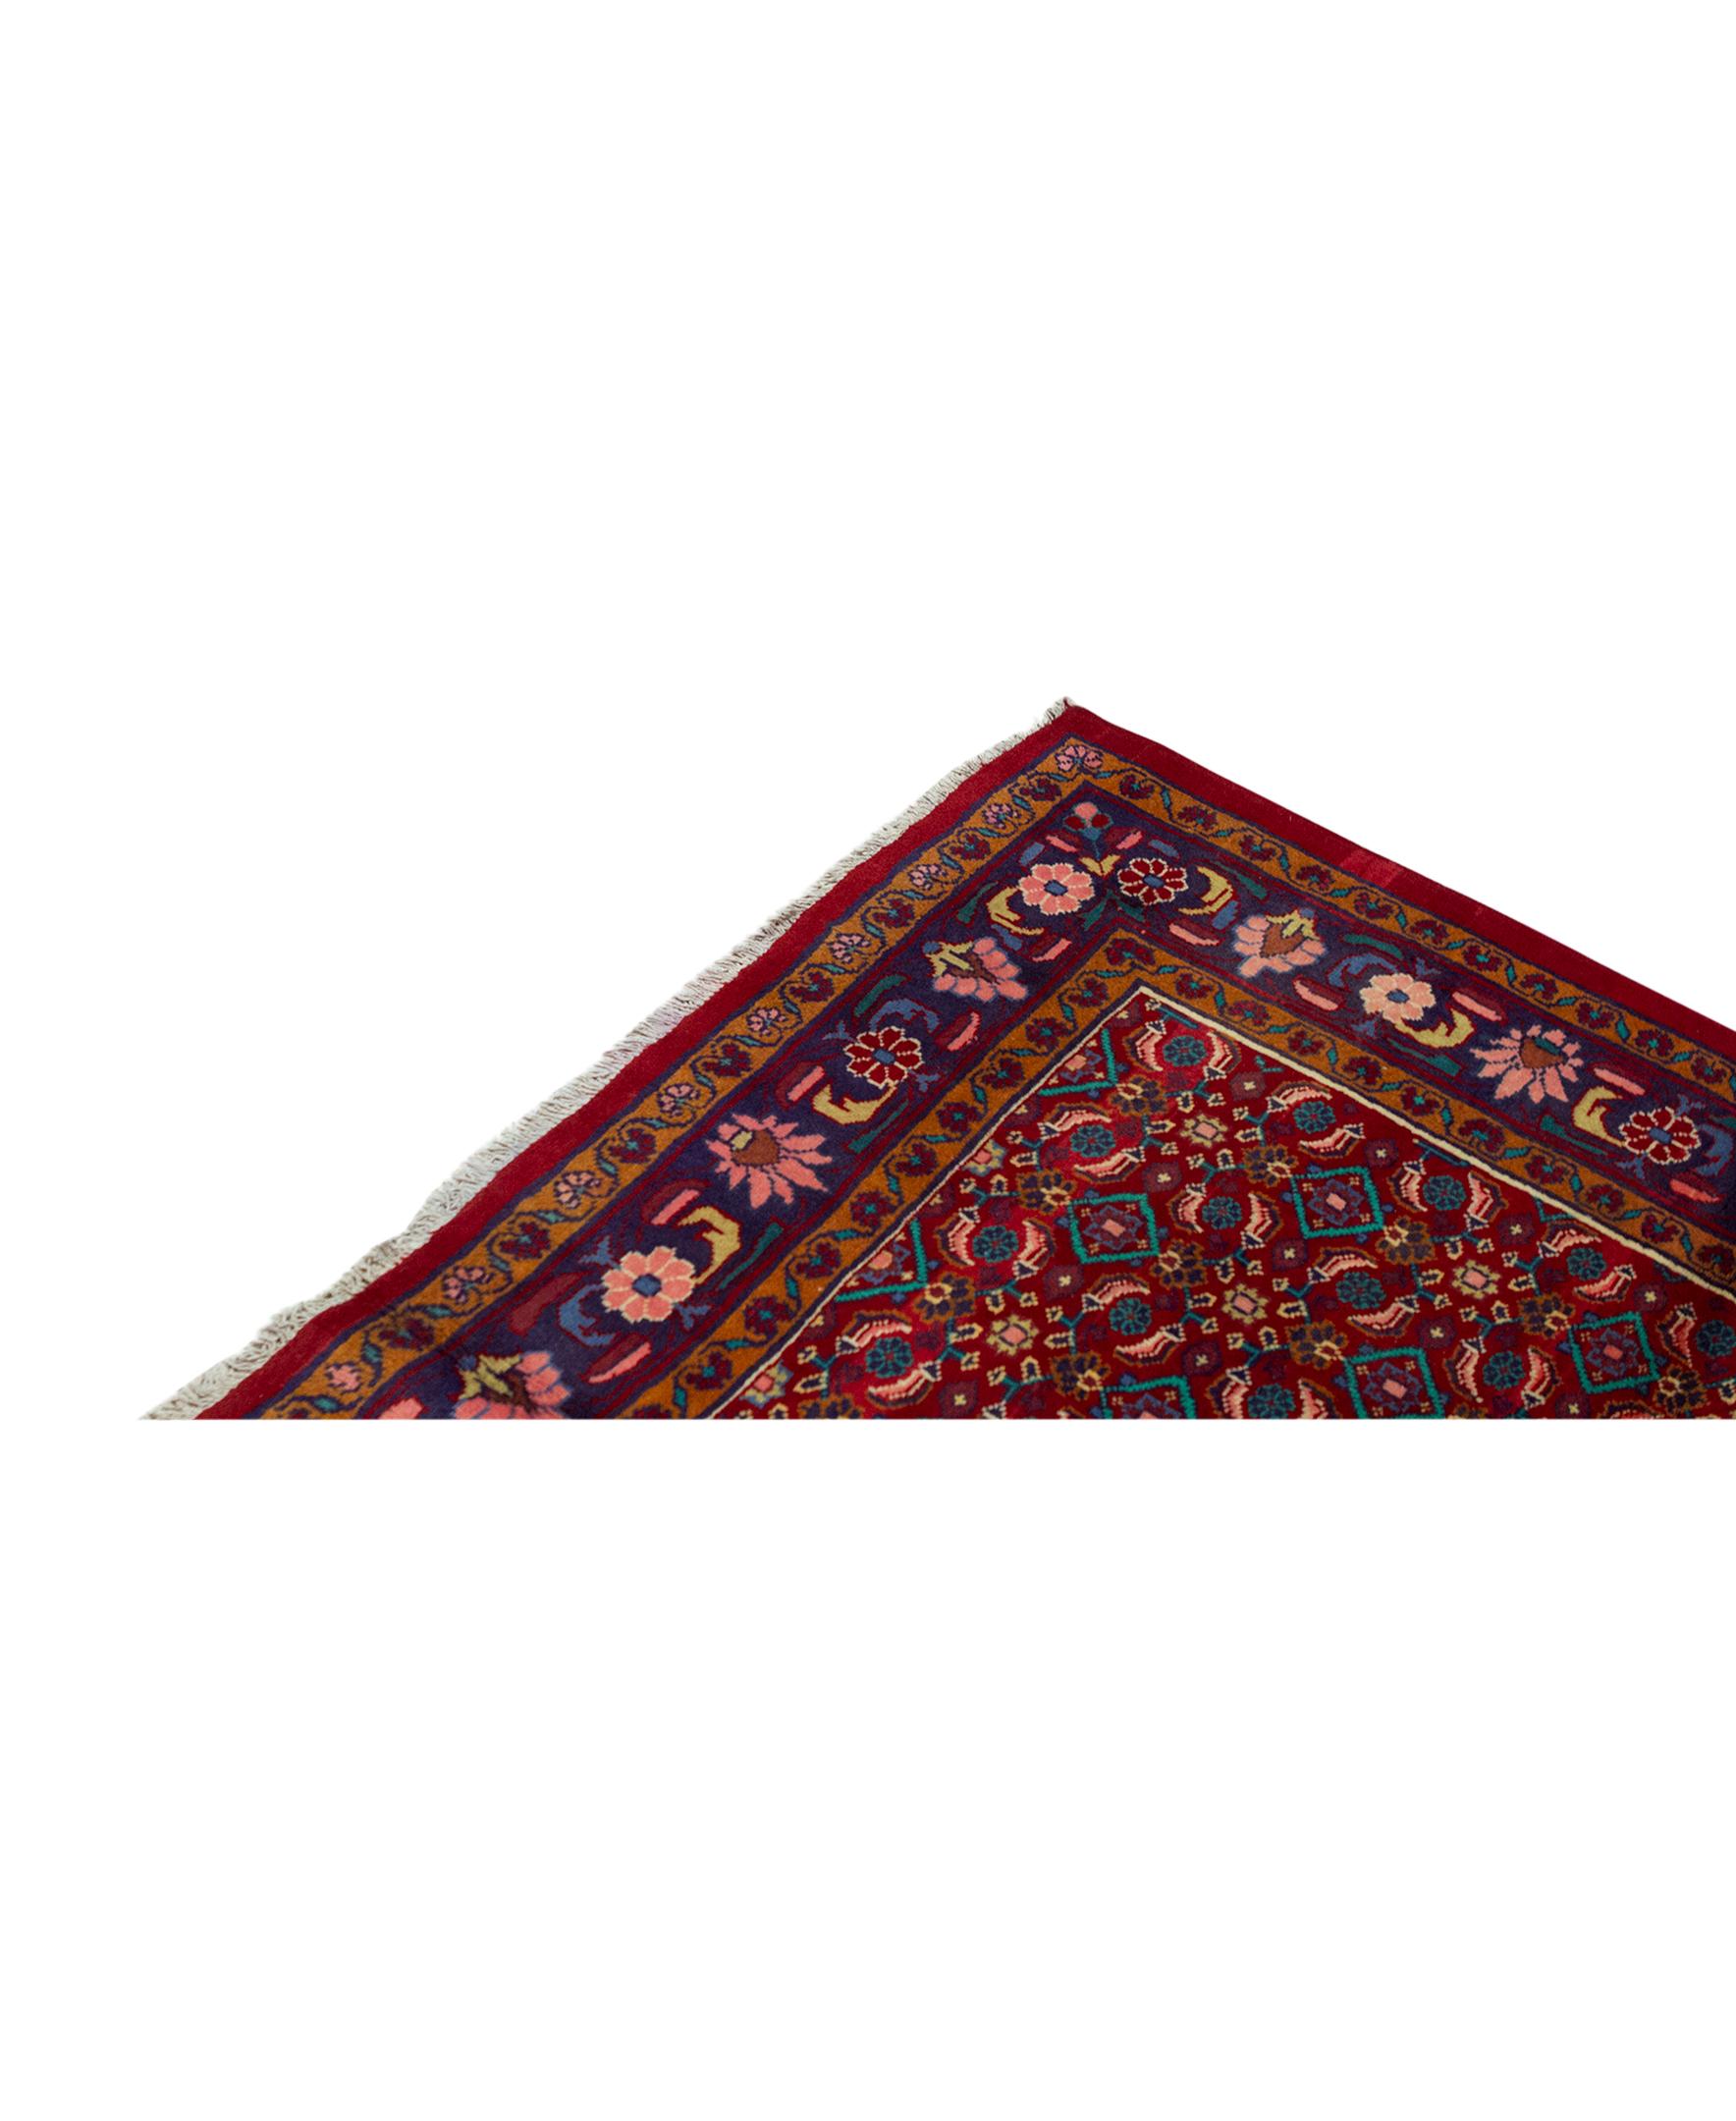  Antique Persian fine Traditional Handwoven Luxury Wool Red / Blue Rug. Size: 6'-8